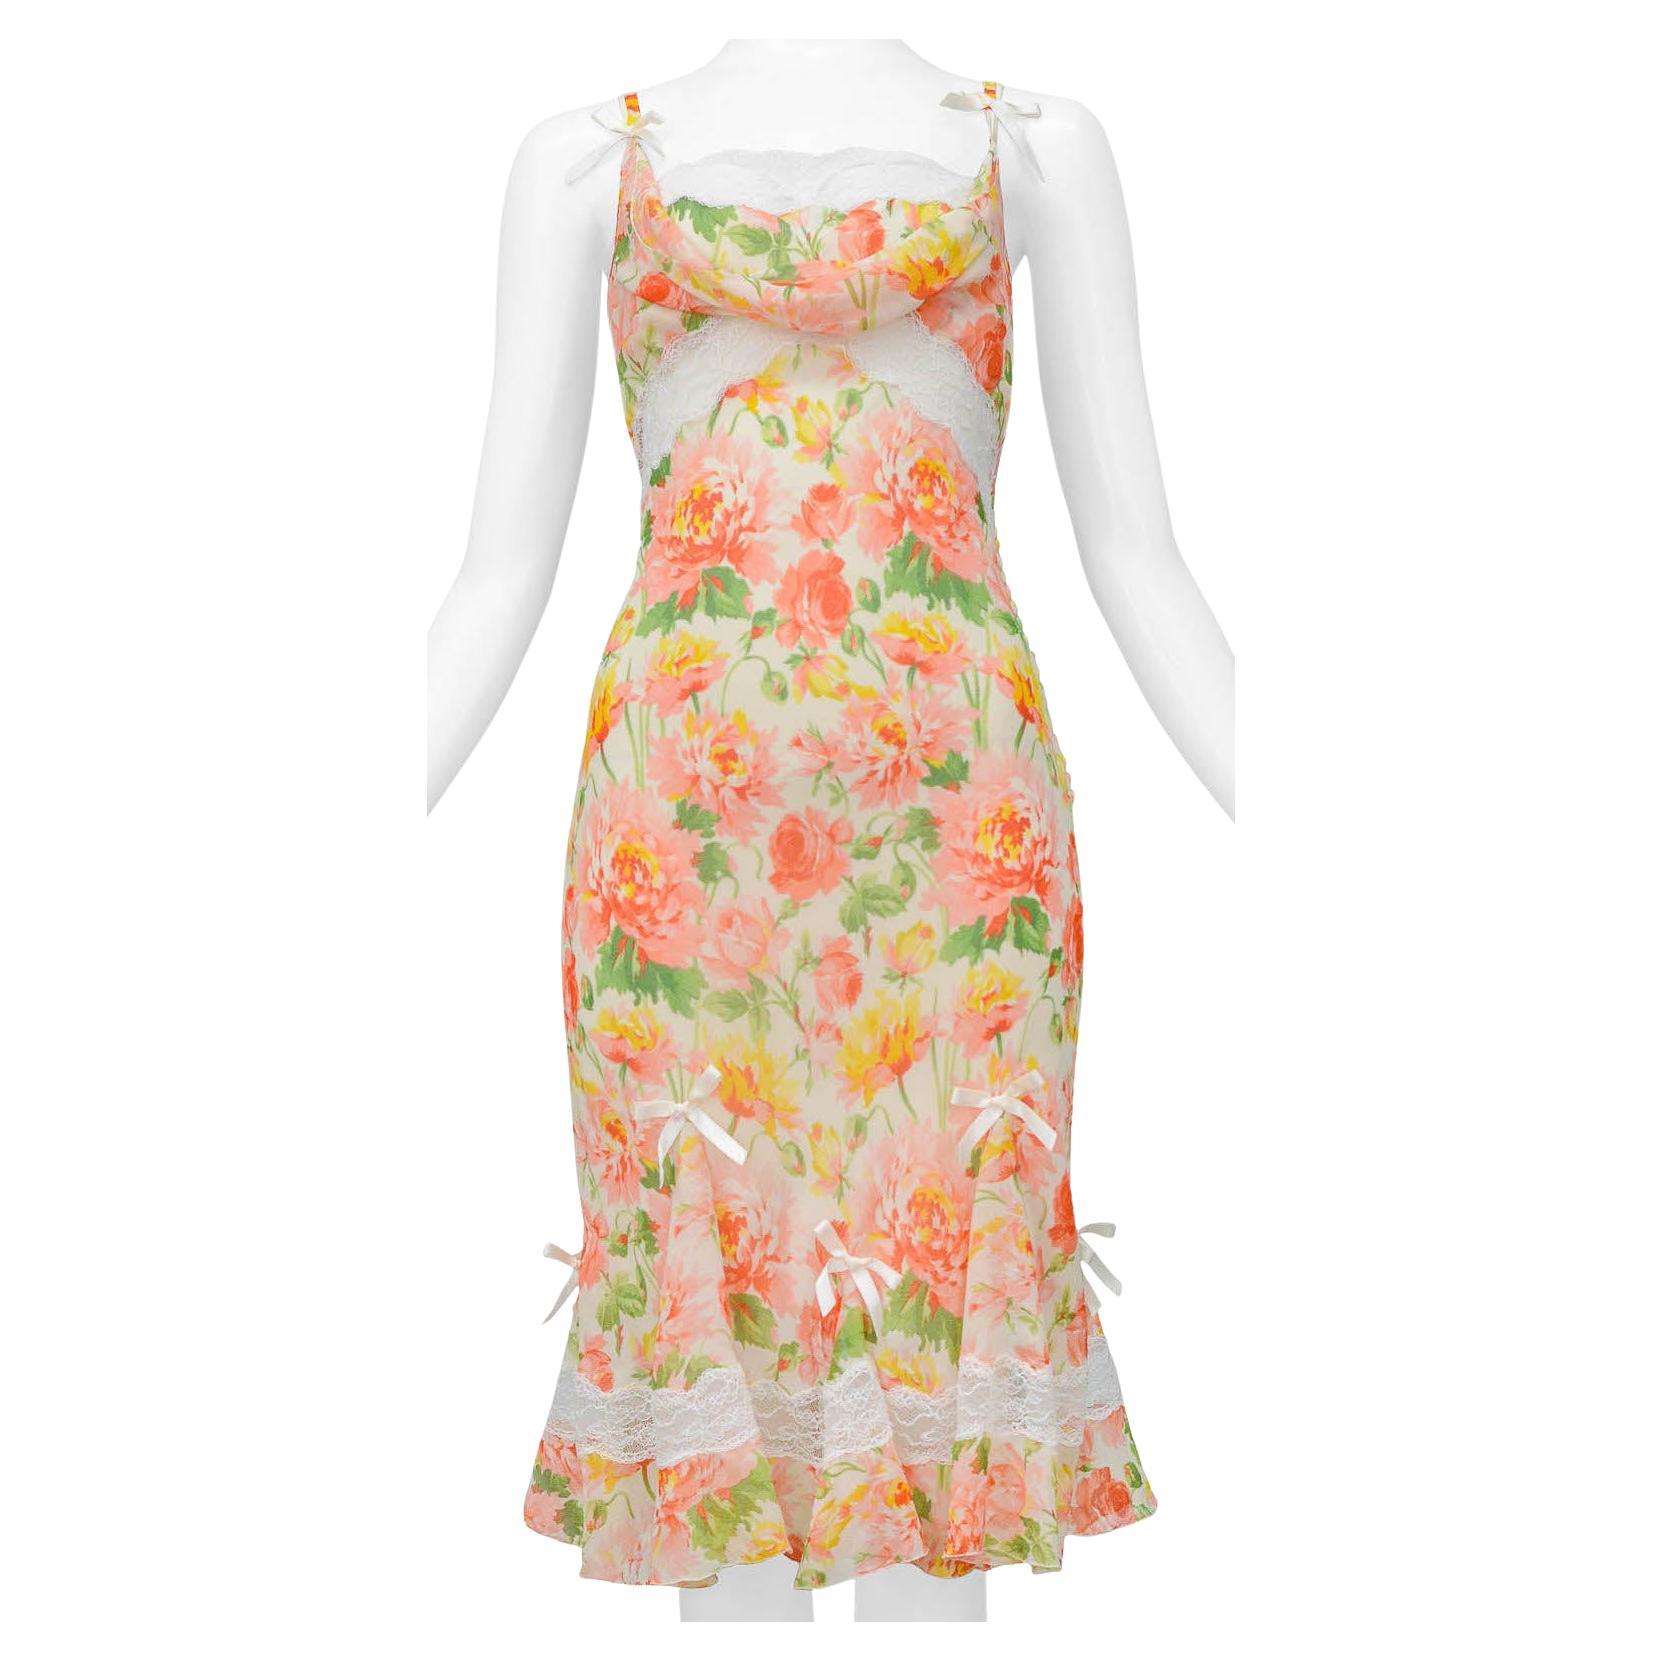 Christian Dior By John Galliano Floral Dress With Lace Insets